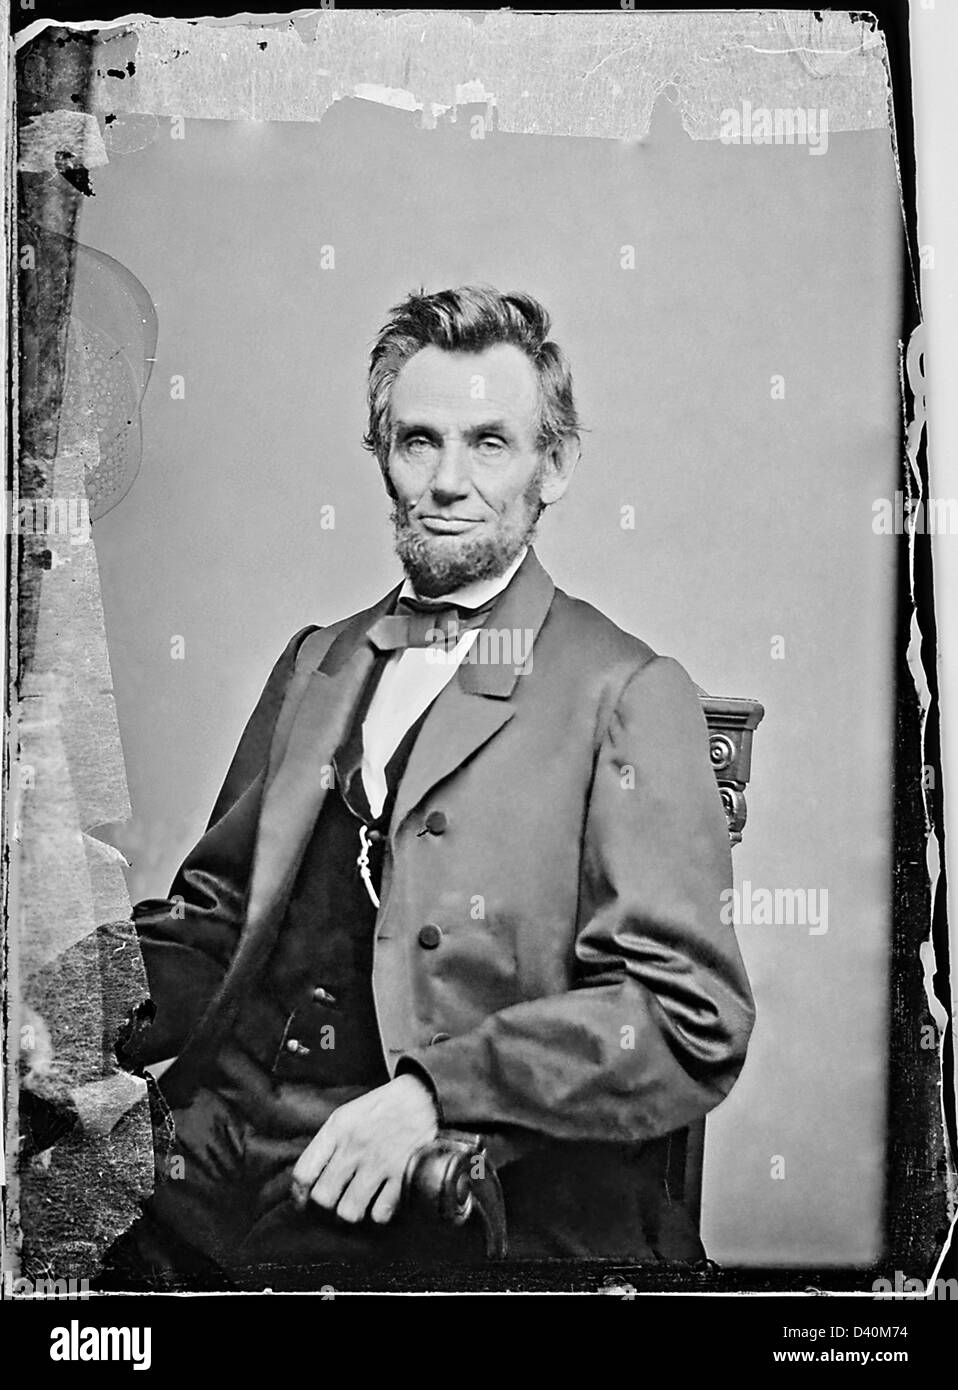 Tintype wet plate portrait of President Abraham Lincoln by Matthew Brady circa 1863. Photo with authentic colloidal marks. Stock Photo